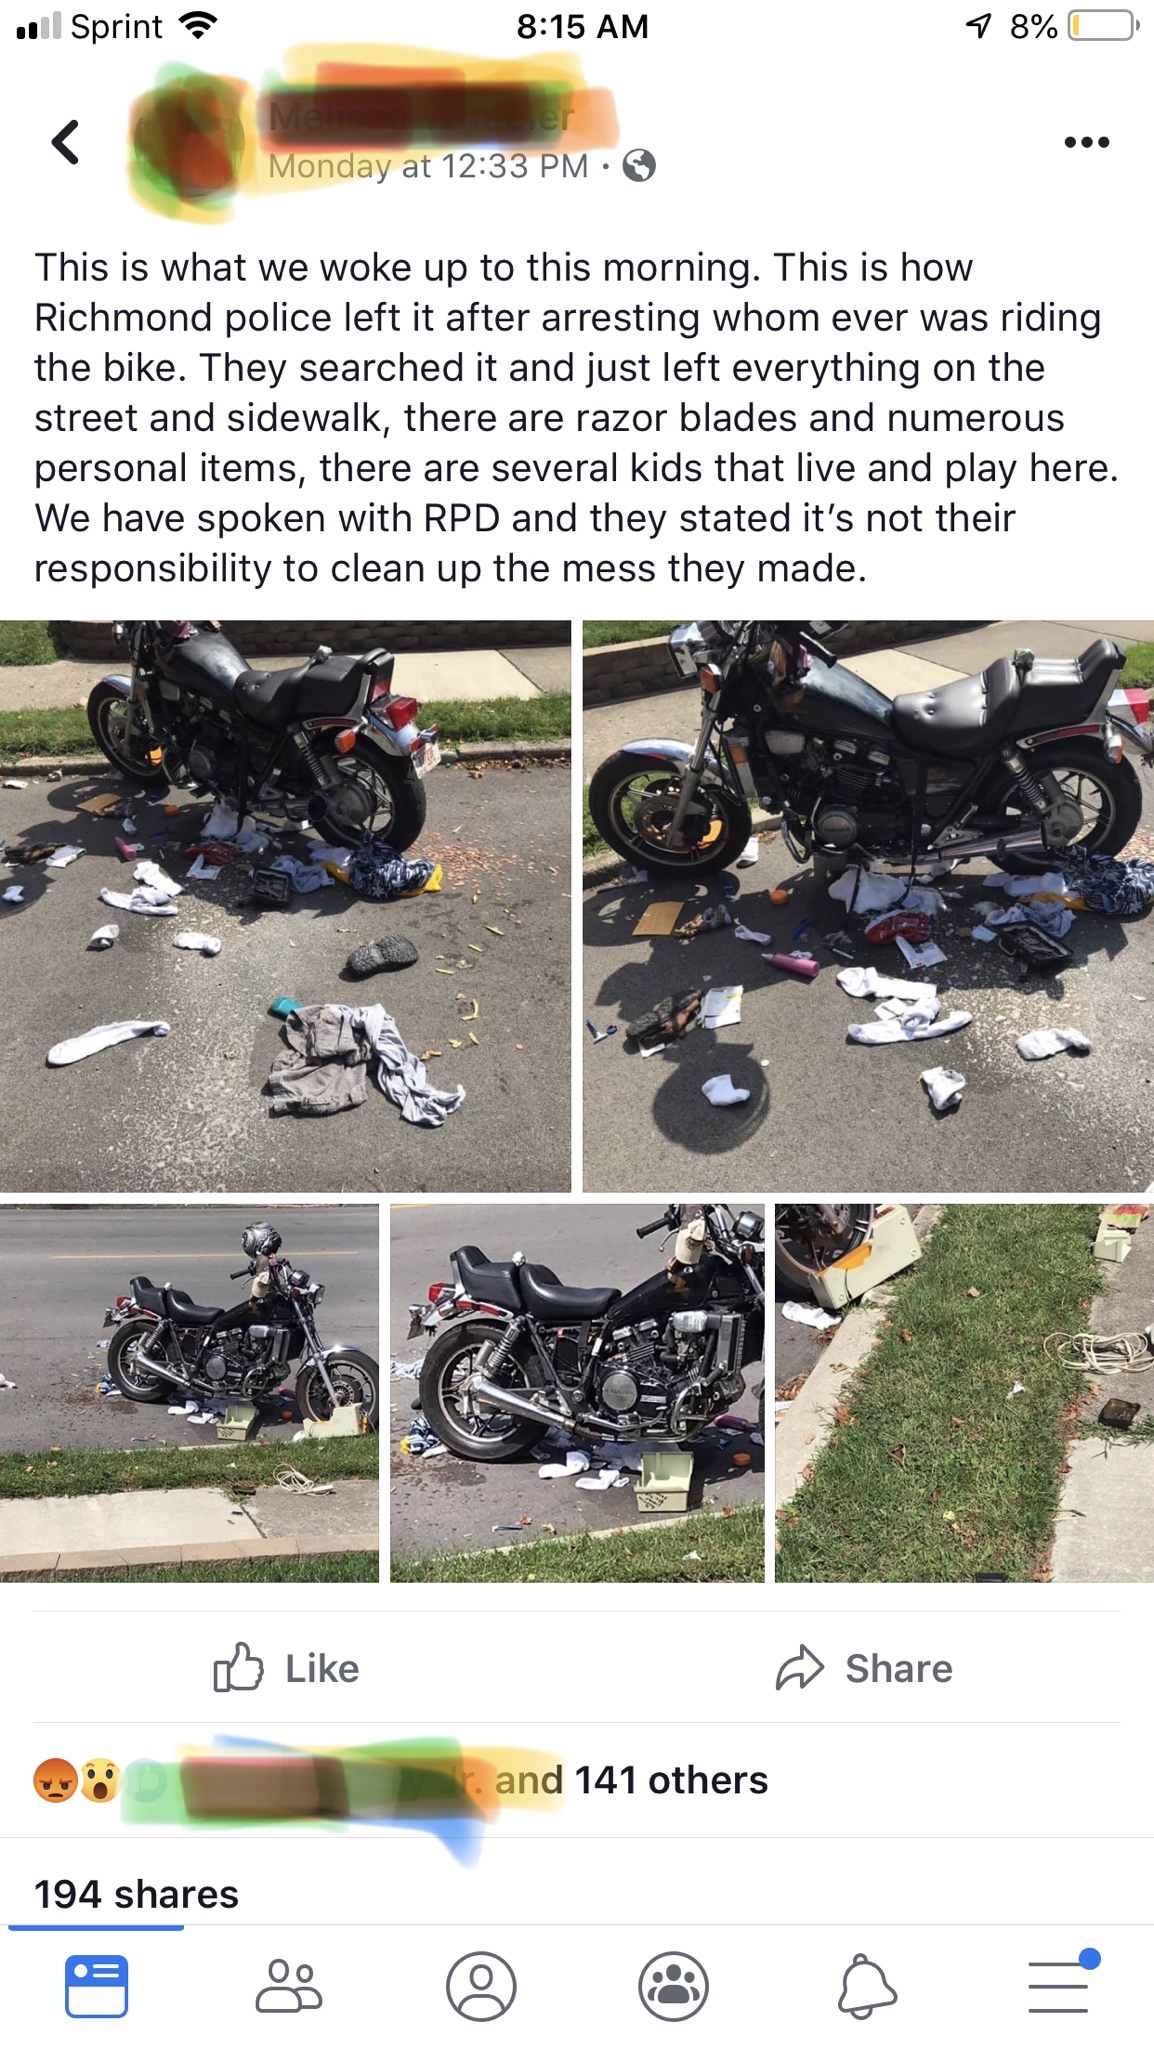 facebook richmond police arrest razor blades motorcycle - Sprint 78% moy at This is what we woke up to this morning. This is how Richmond police left it after arresting whom ever was riding the bike. They searched it and just left everything on the street